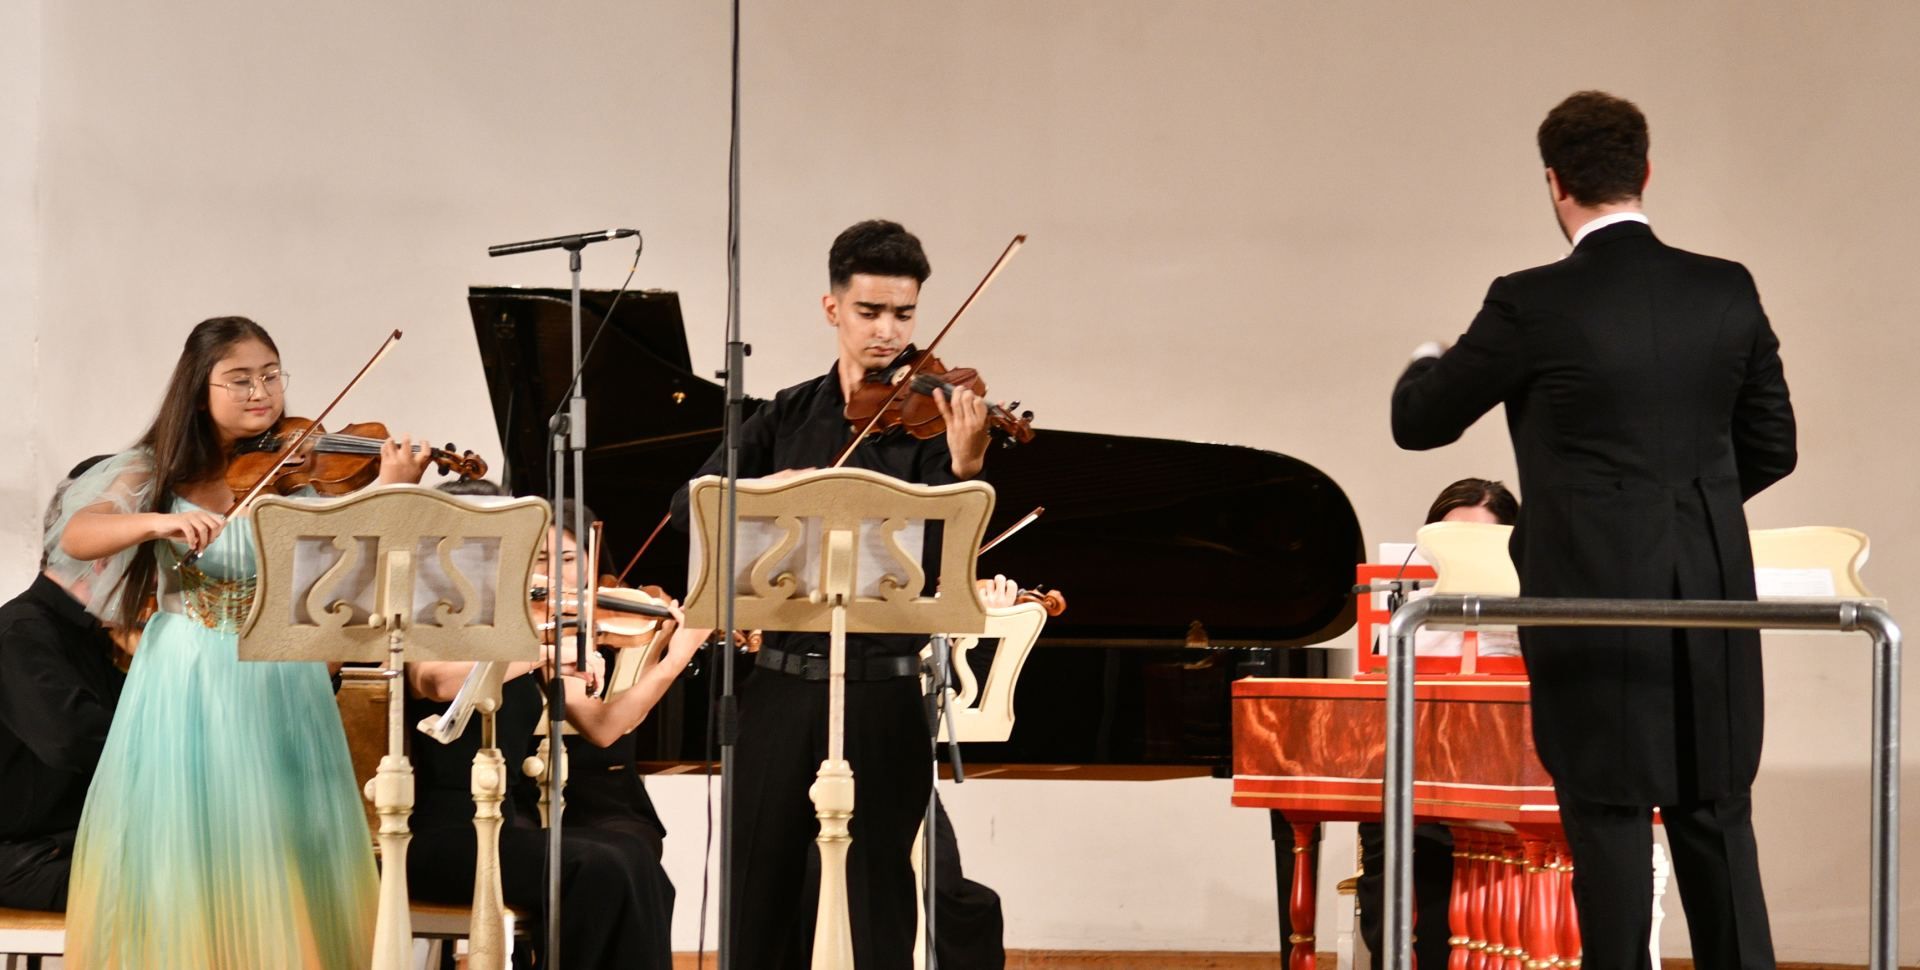 Fantastic concert held in Baku within Simurg project [PHOTOS]